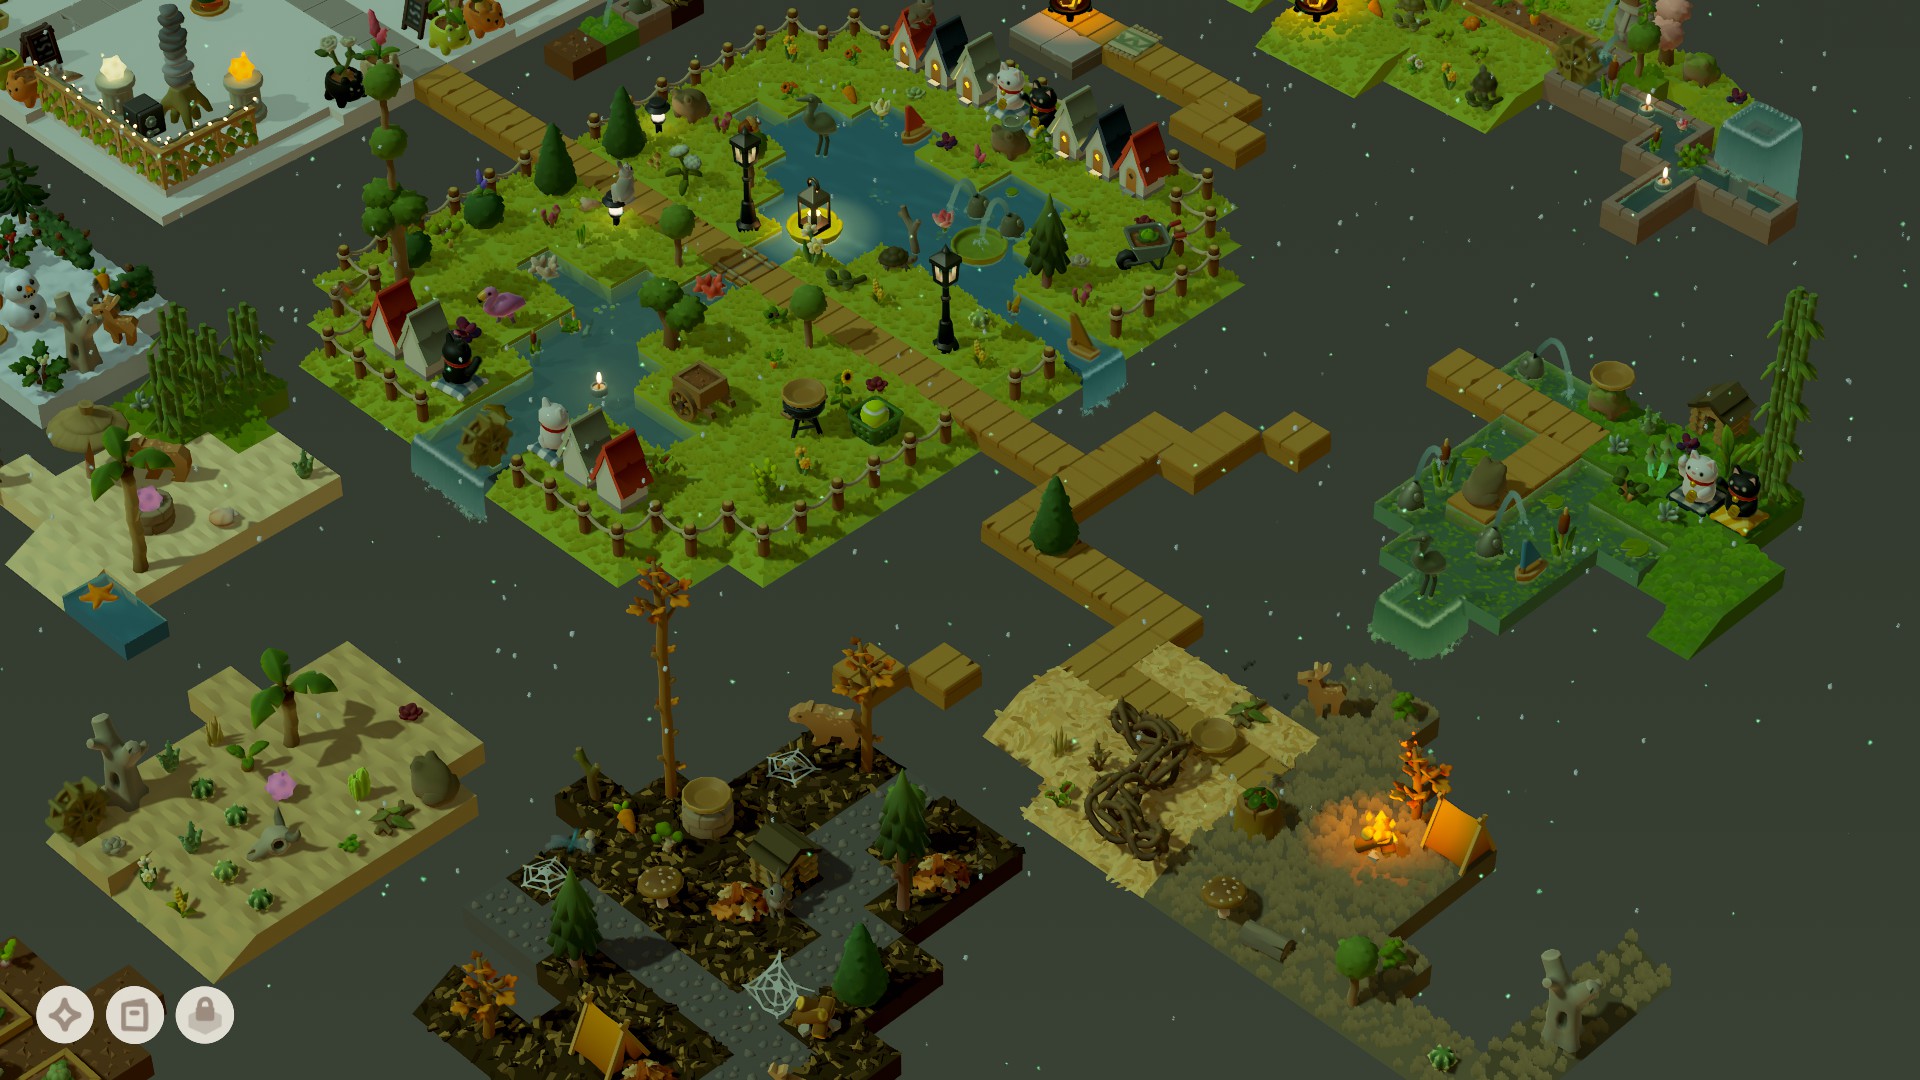 A zoomed out screenshot showing a grass area with a lake, flowers, and houses, a woods area with a cabin and tents, a small swamp area, and a tiny desert area with cacti, a palm tree, and an animal skull.